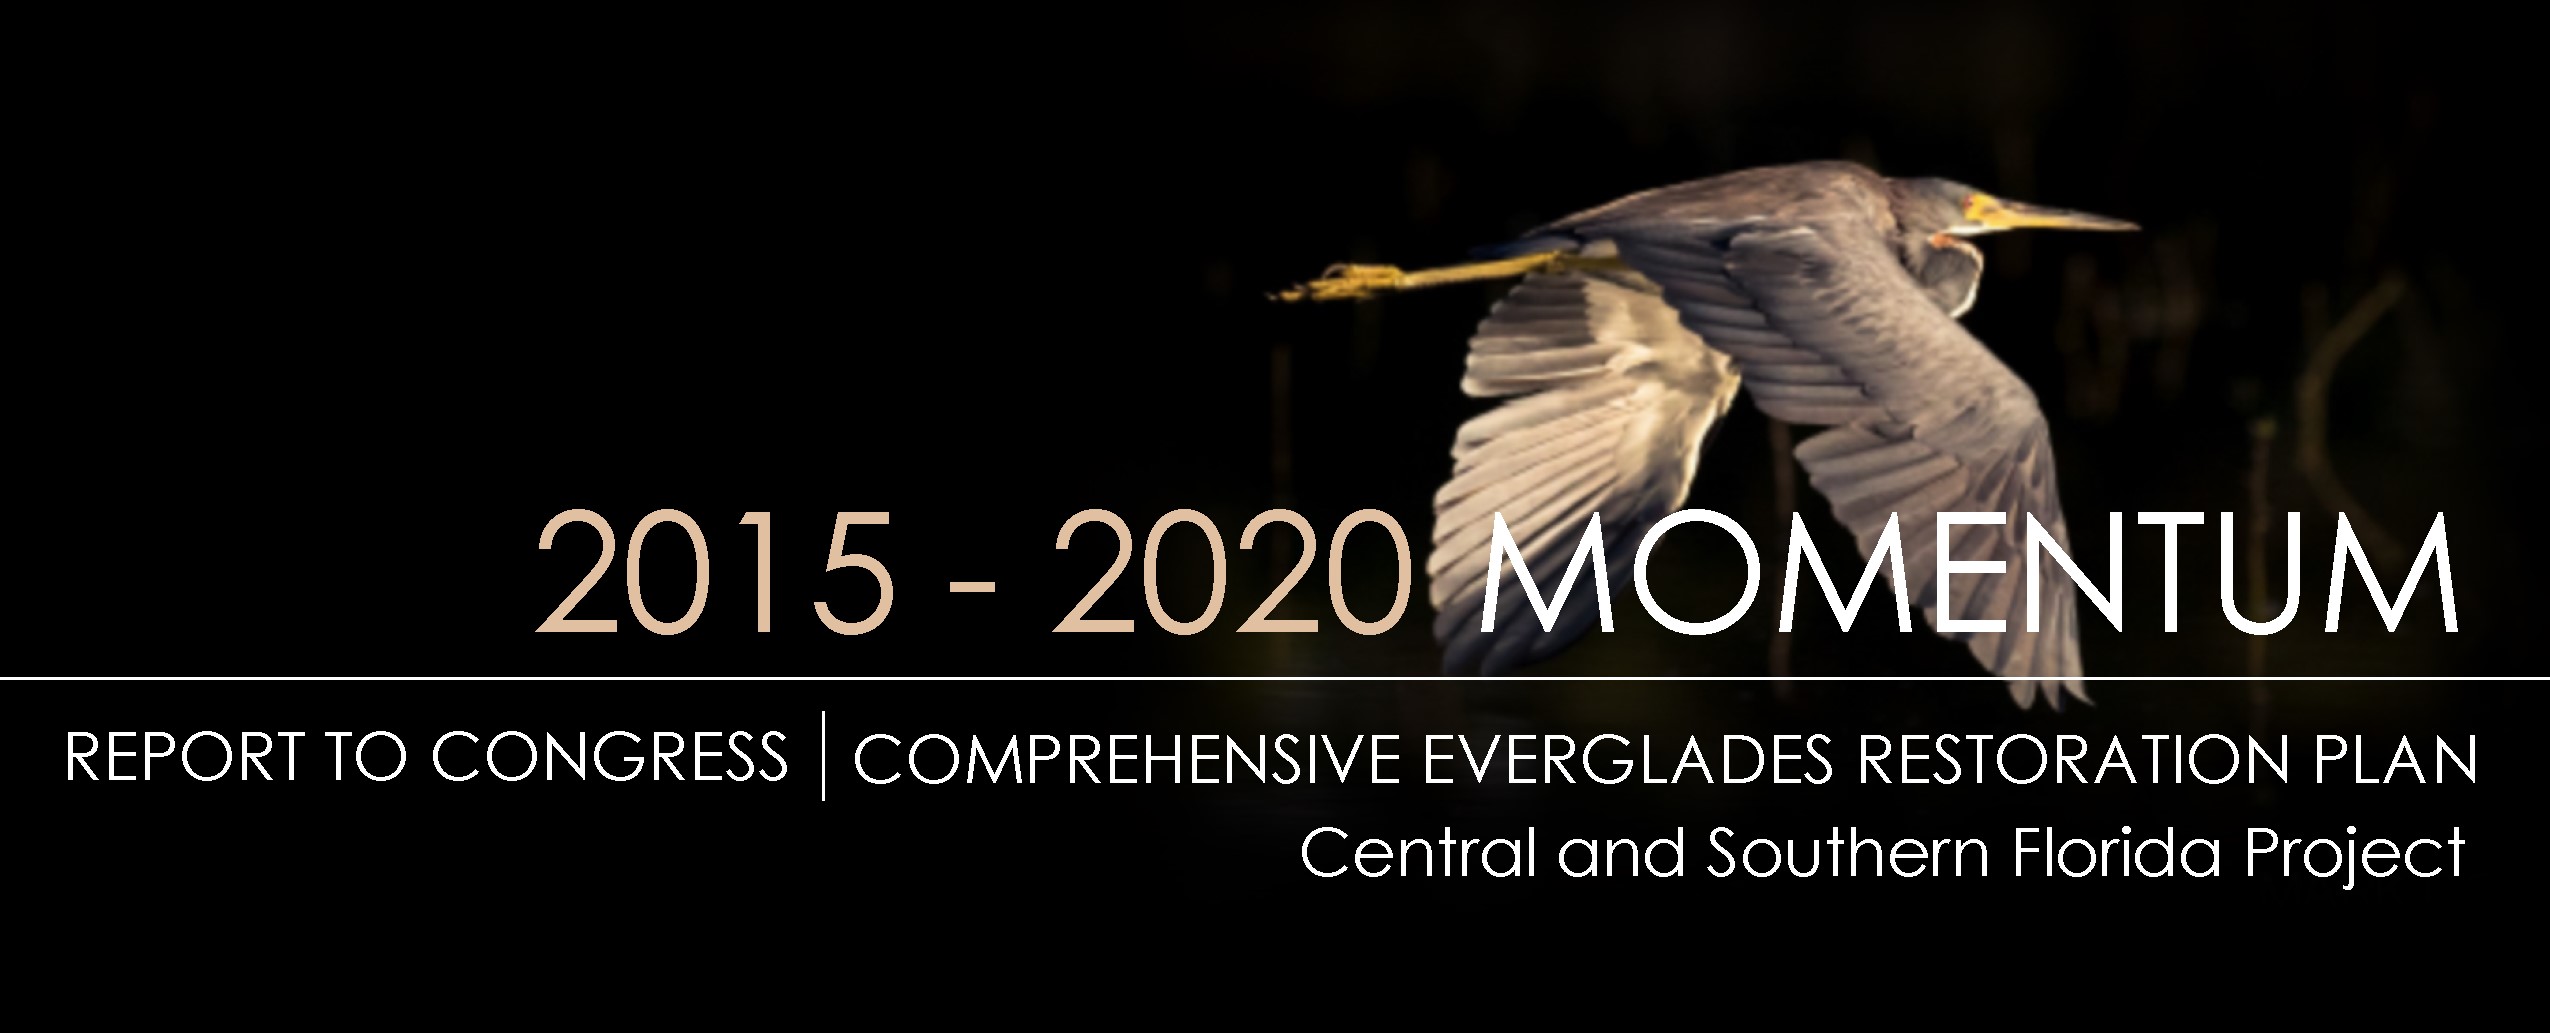 Cover of 2015 - 2020 Momentum Report to Congress - Comprehensive Everglades Restoration Plan - Central and Southern Florida Project